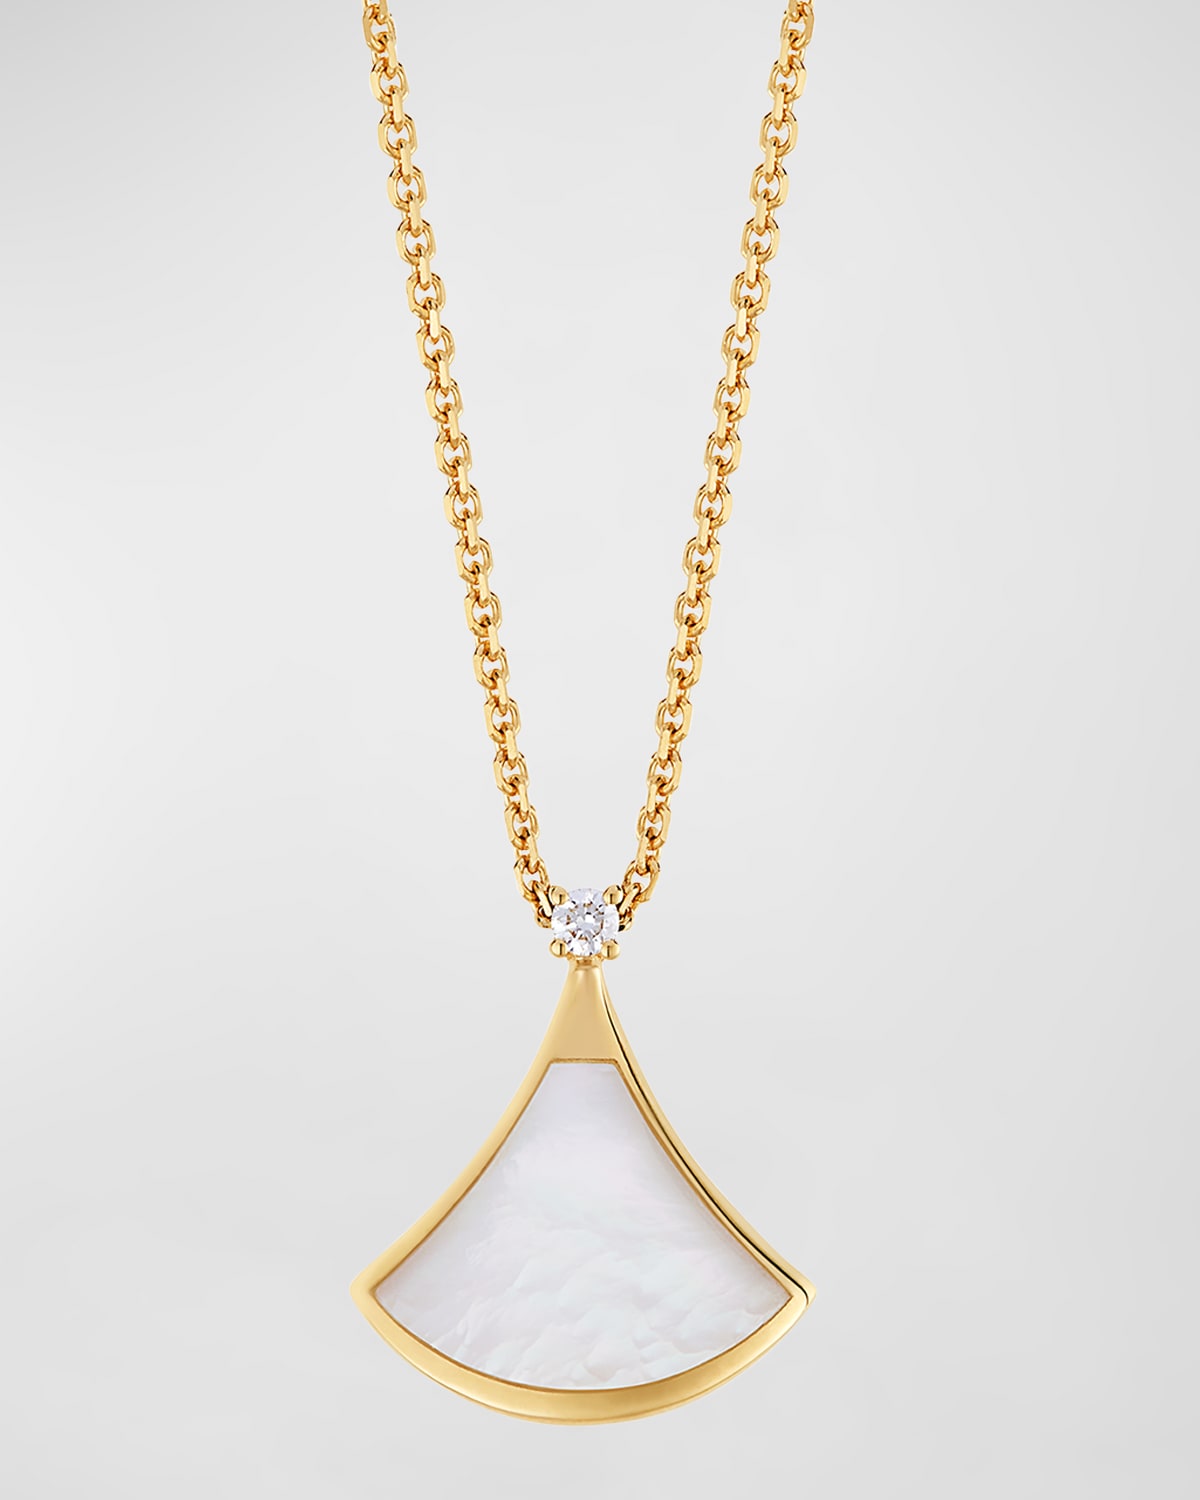 BVLGARI DIVAS' DREAM YELLOW GOLD PENDANT NECKLACE WITH MOTHER-OF-PEARL